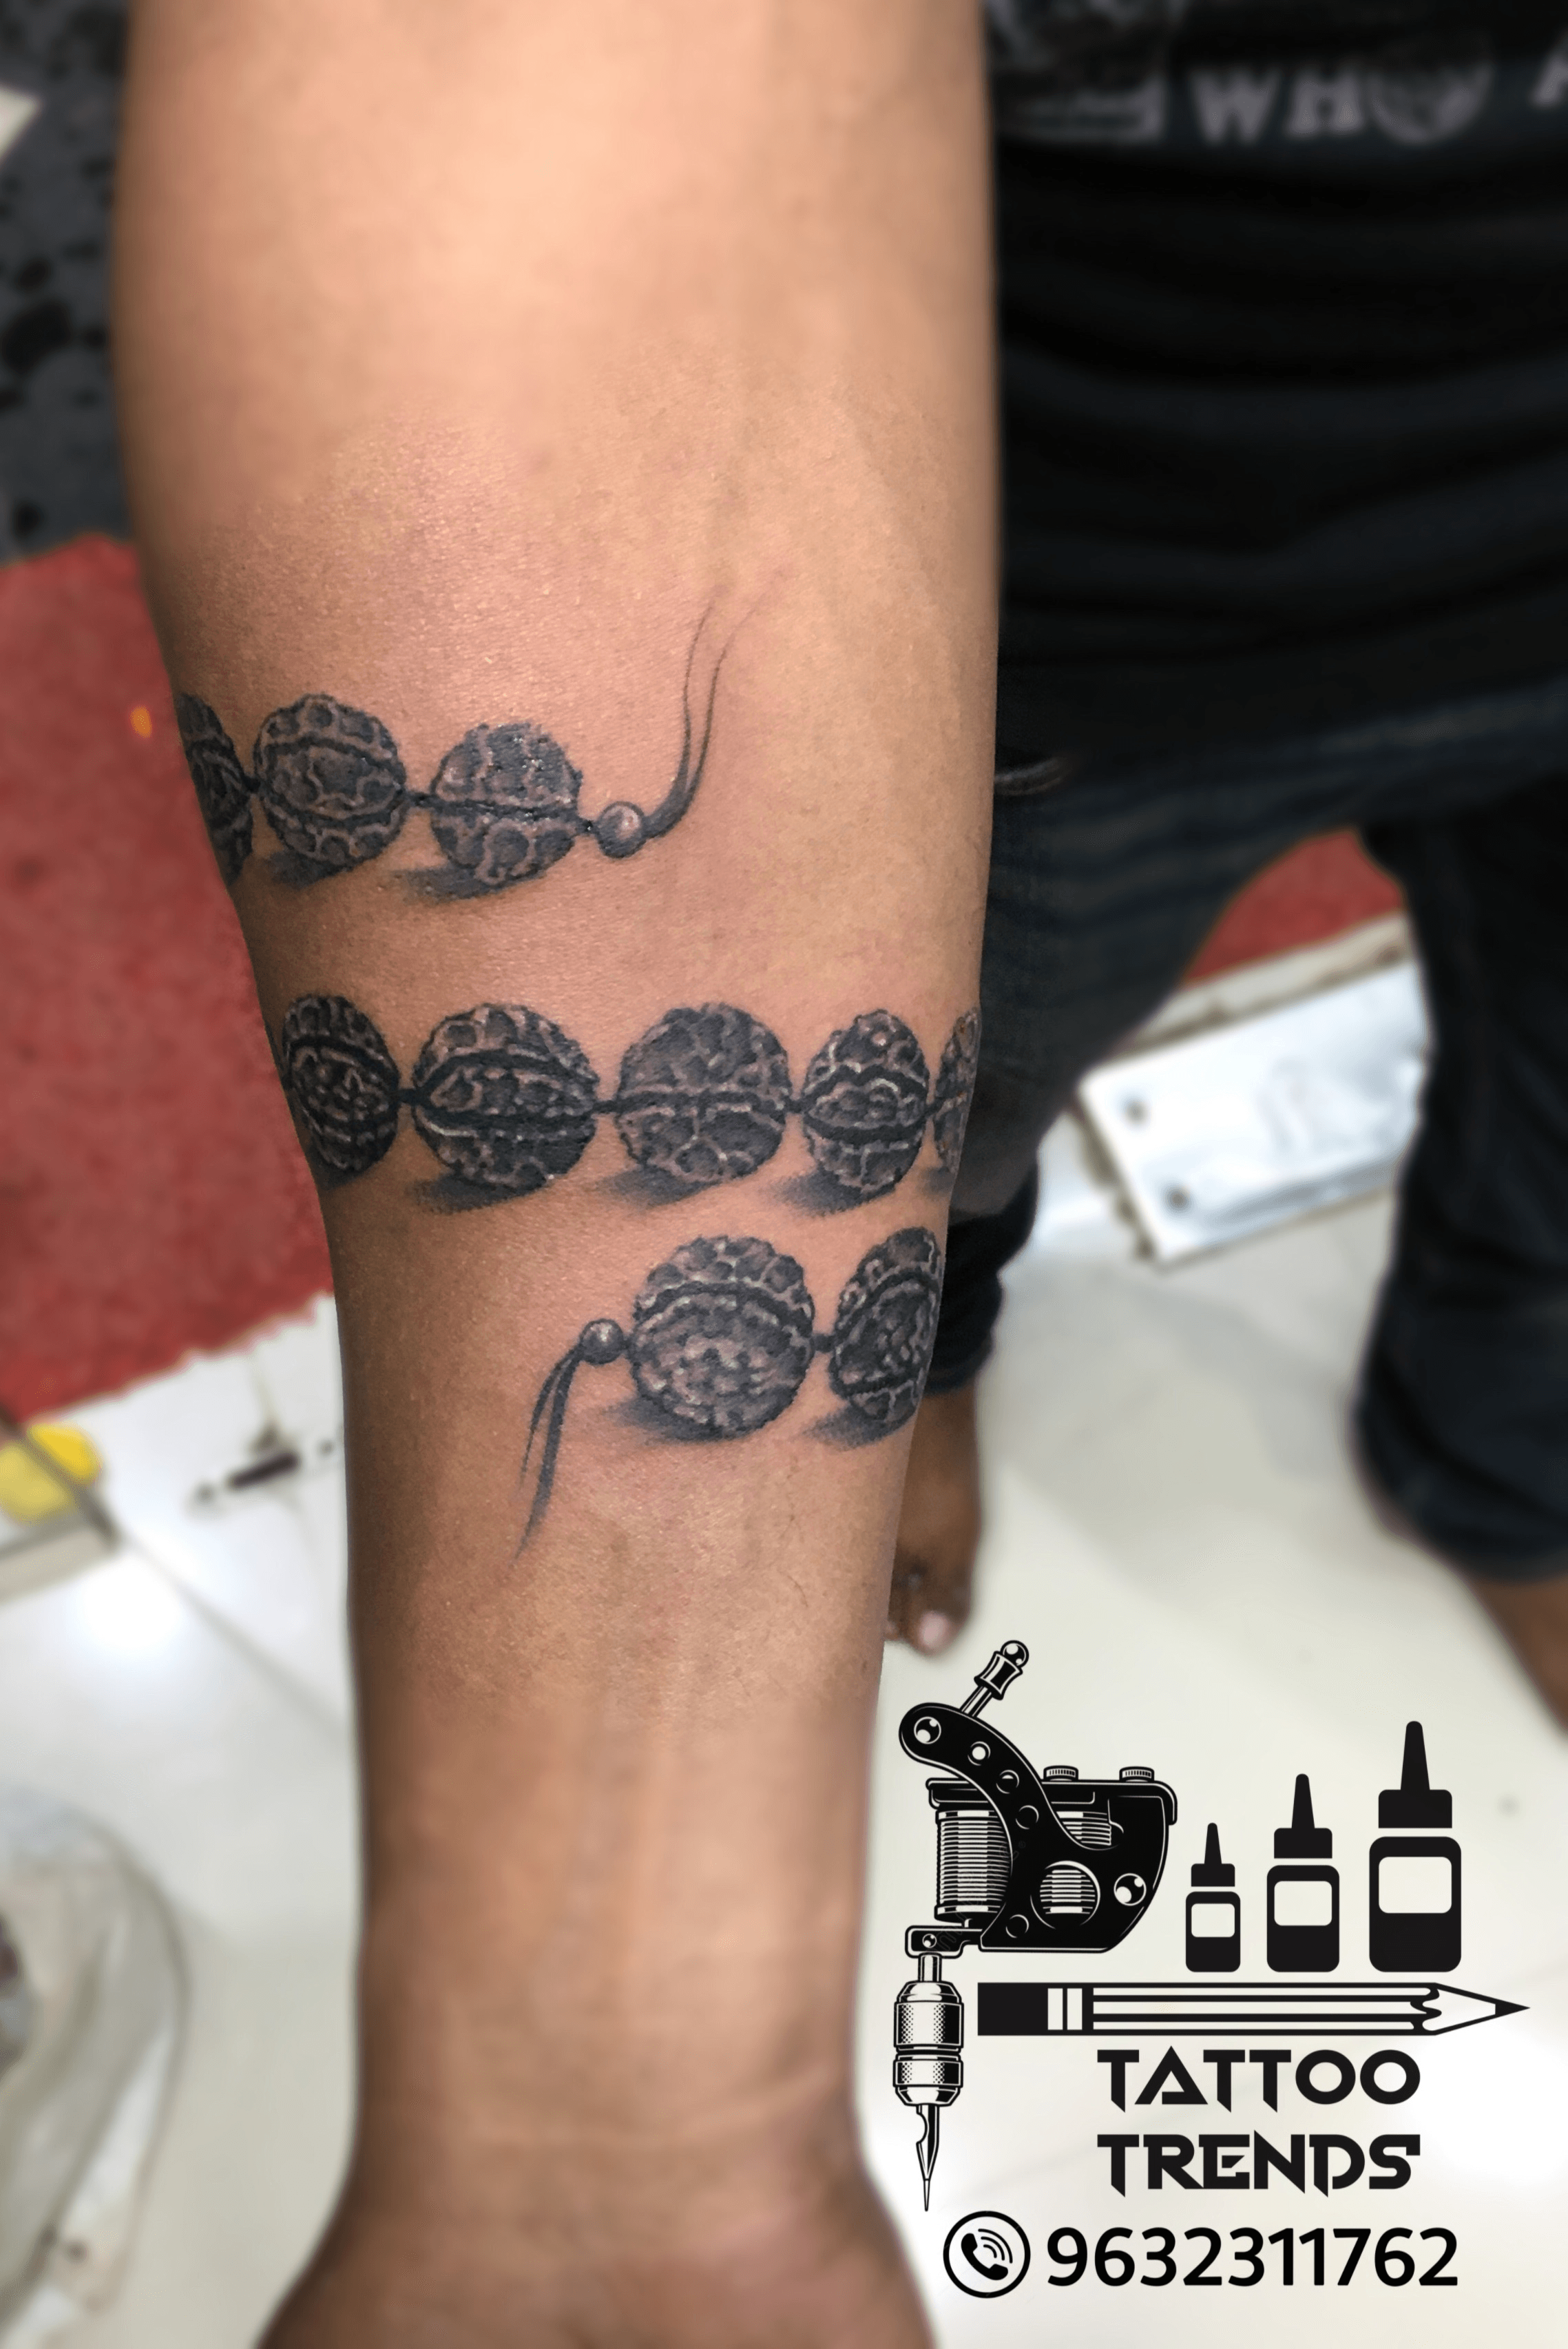 Rudra Tattoo  Piercing Studio  Tattoo Studio in Ahmedabad excelling with  professional quality Tattoos